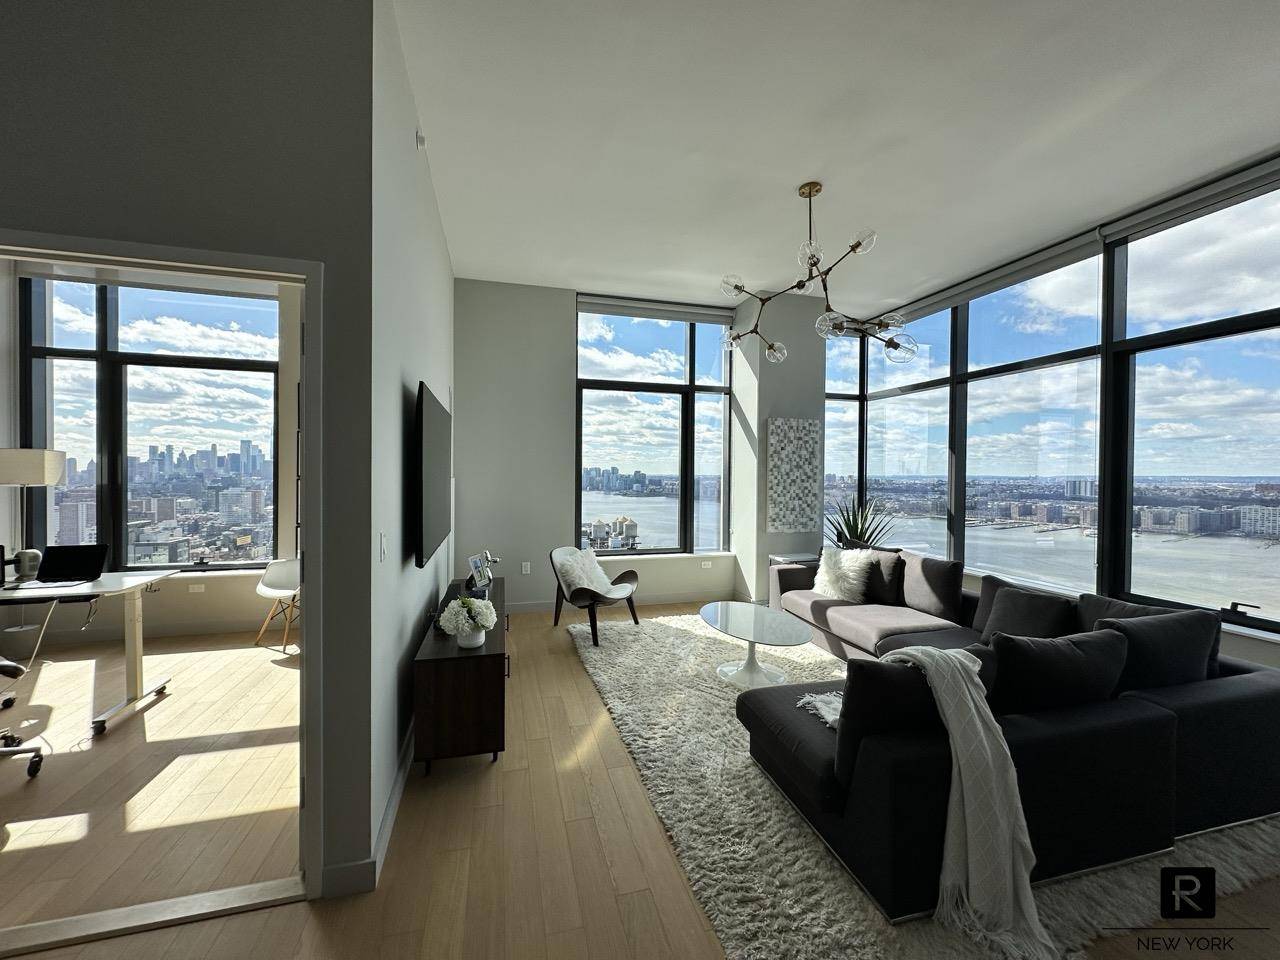 311 Eleventh Avenue is one of the nicest buildings in Hudson Yards with incredible amenities.